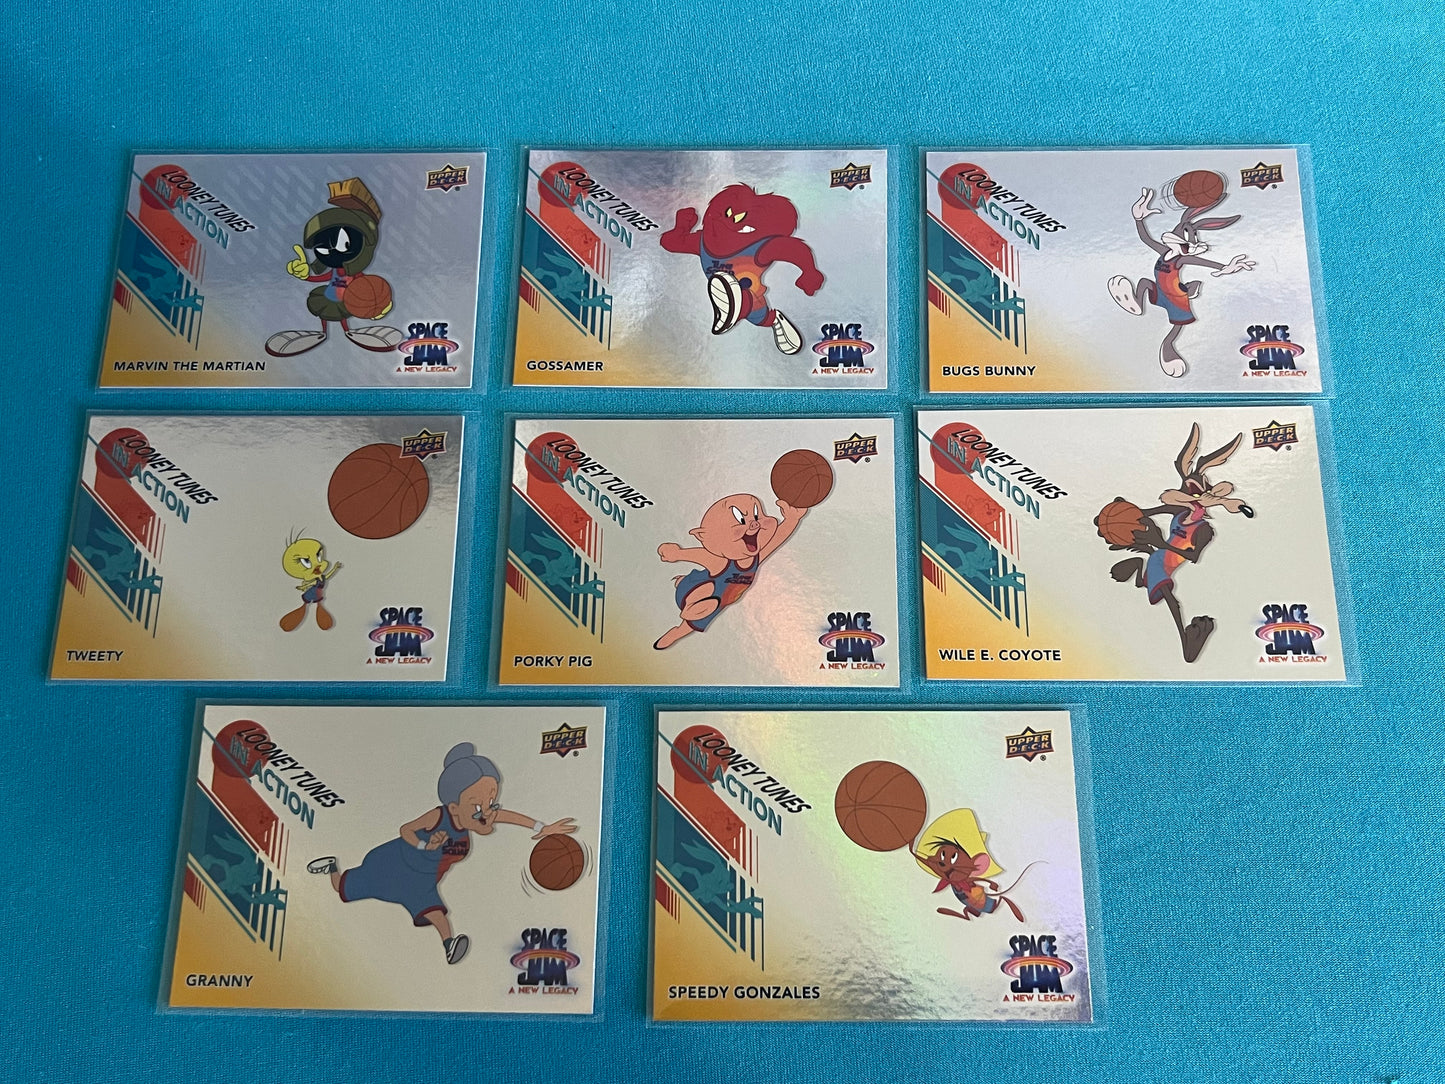 Space Jam In Action Card Lot (8) Basketball Sport Upper Deck